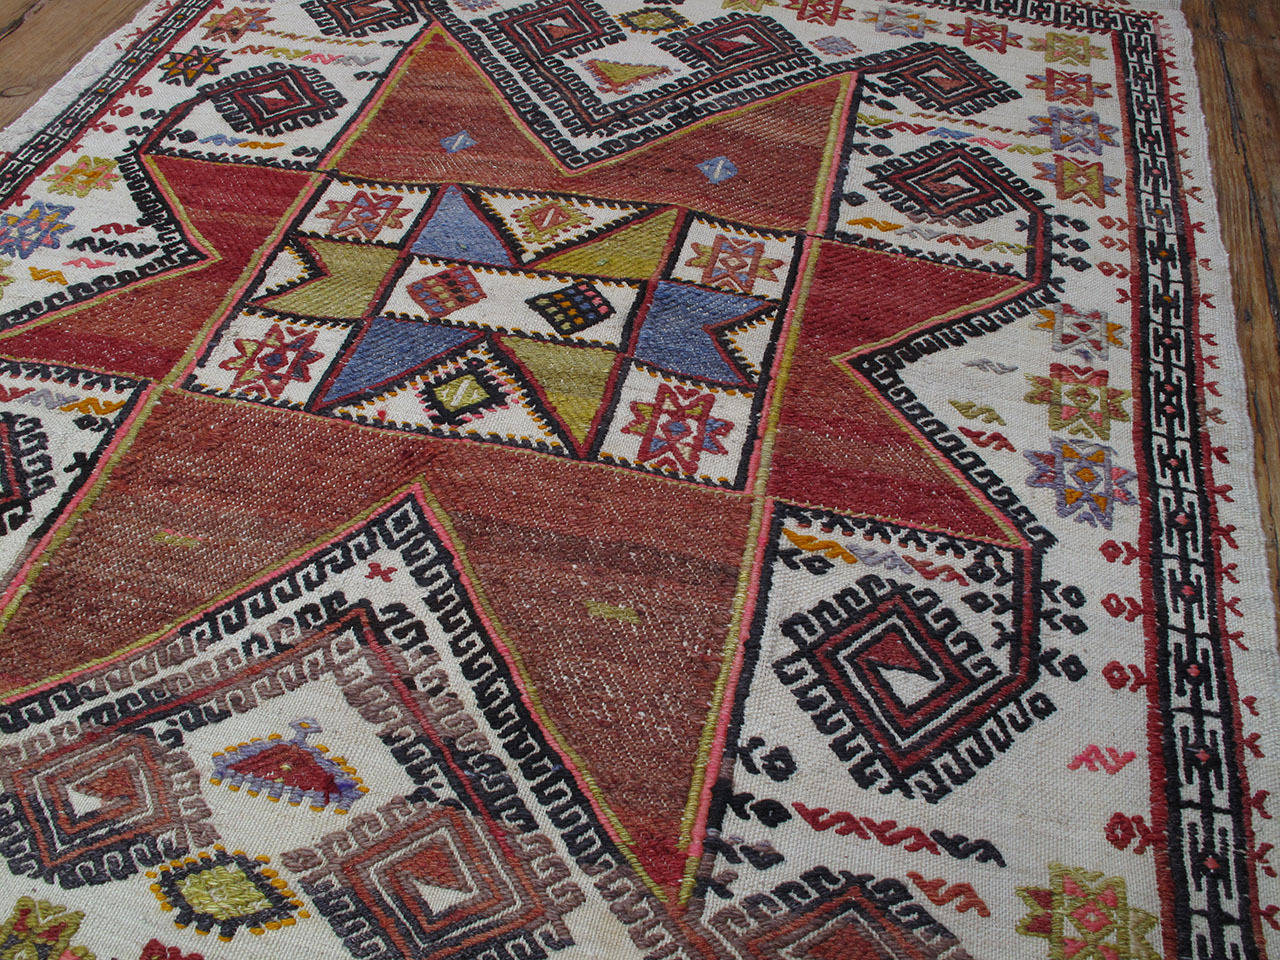 Hand-Woven Small Kilim with Large Star